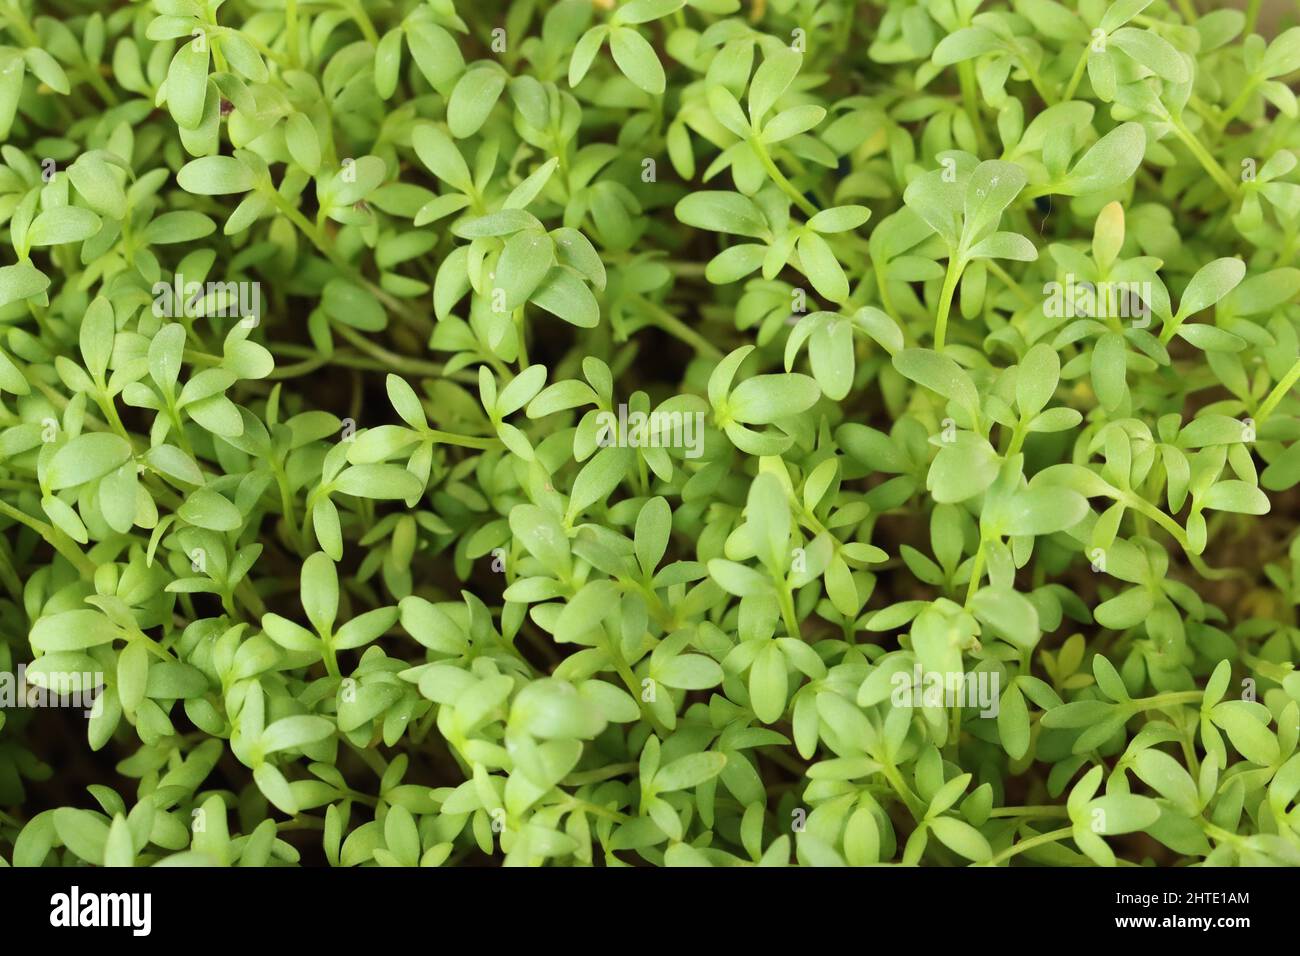 close-up of fresh green garden cress, view from above Stock Photo